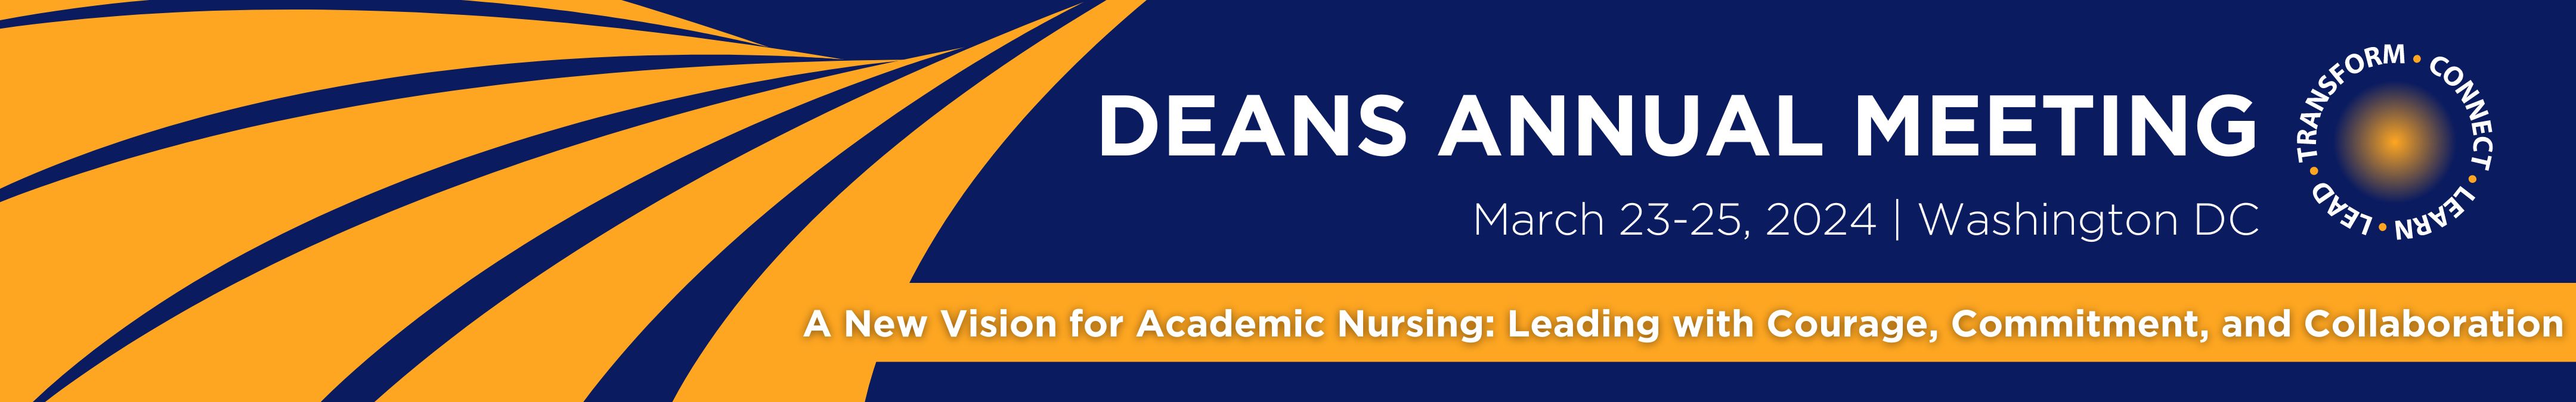 american association of colleges of nursing | the voice of academic nursing | Deans Annual Meeting | Transform. connect. learn. lead